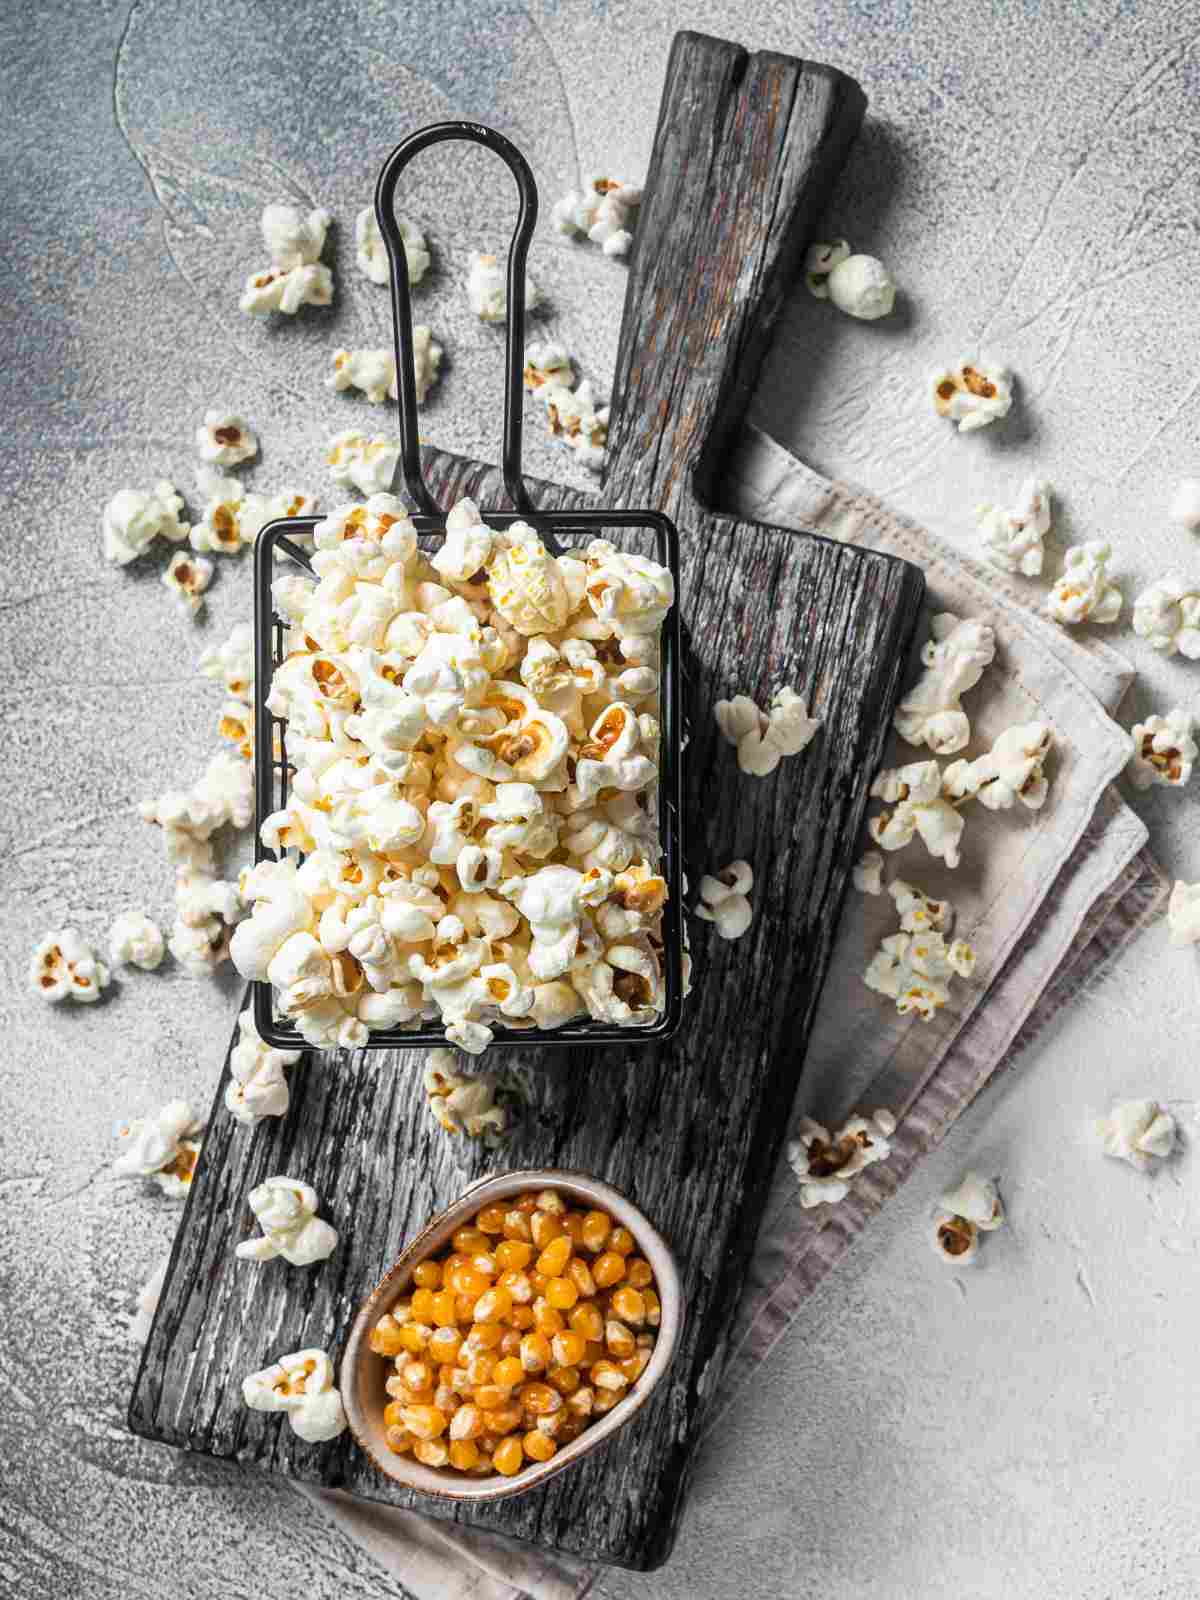 Is Popcorn Good for Weight Loss